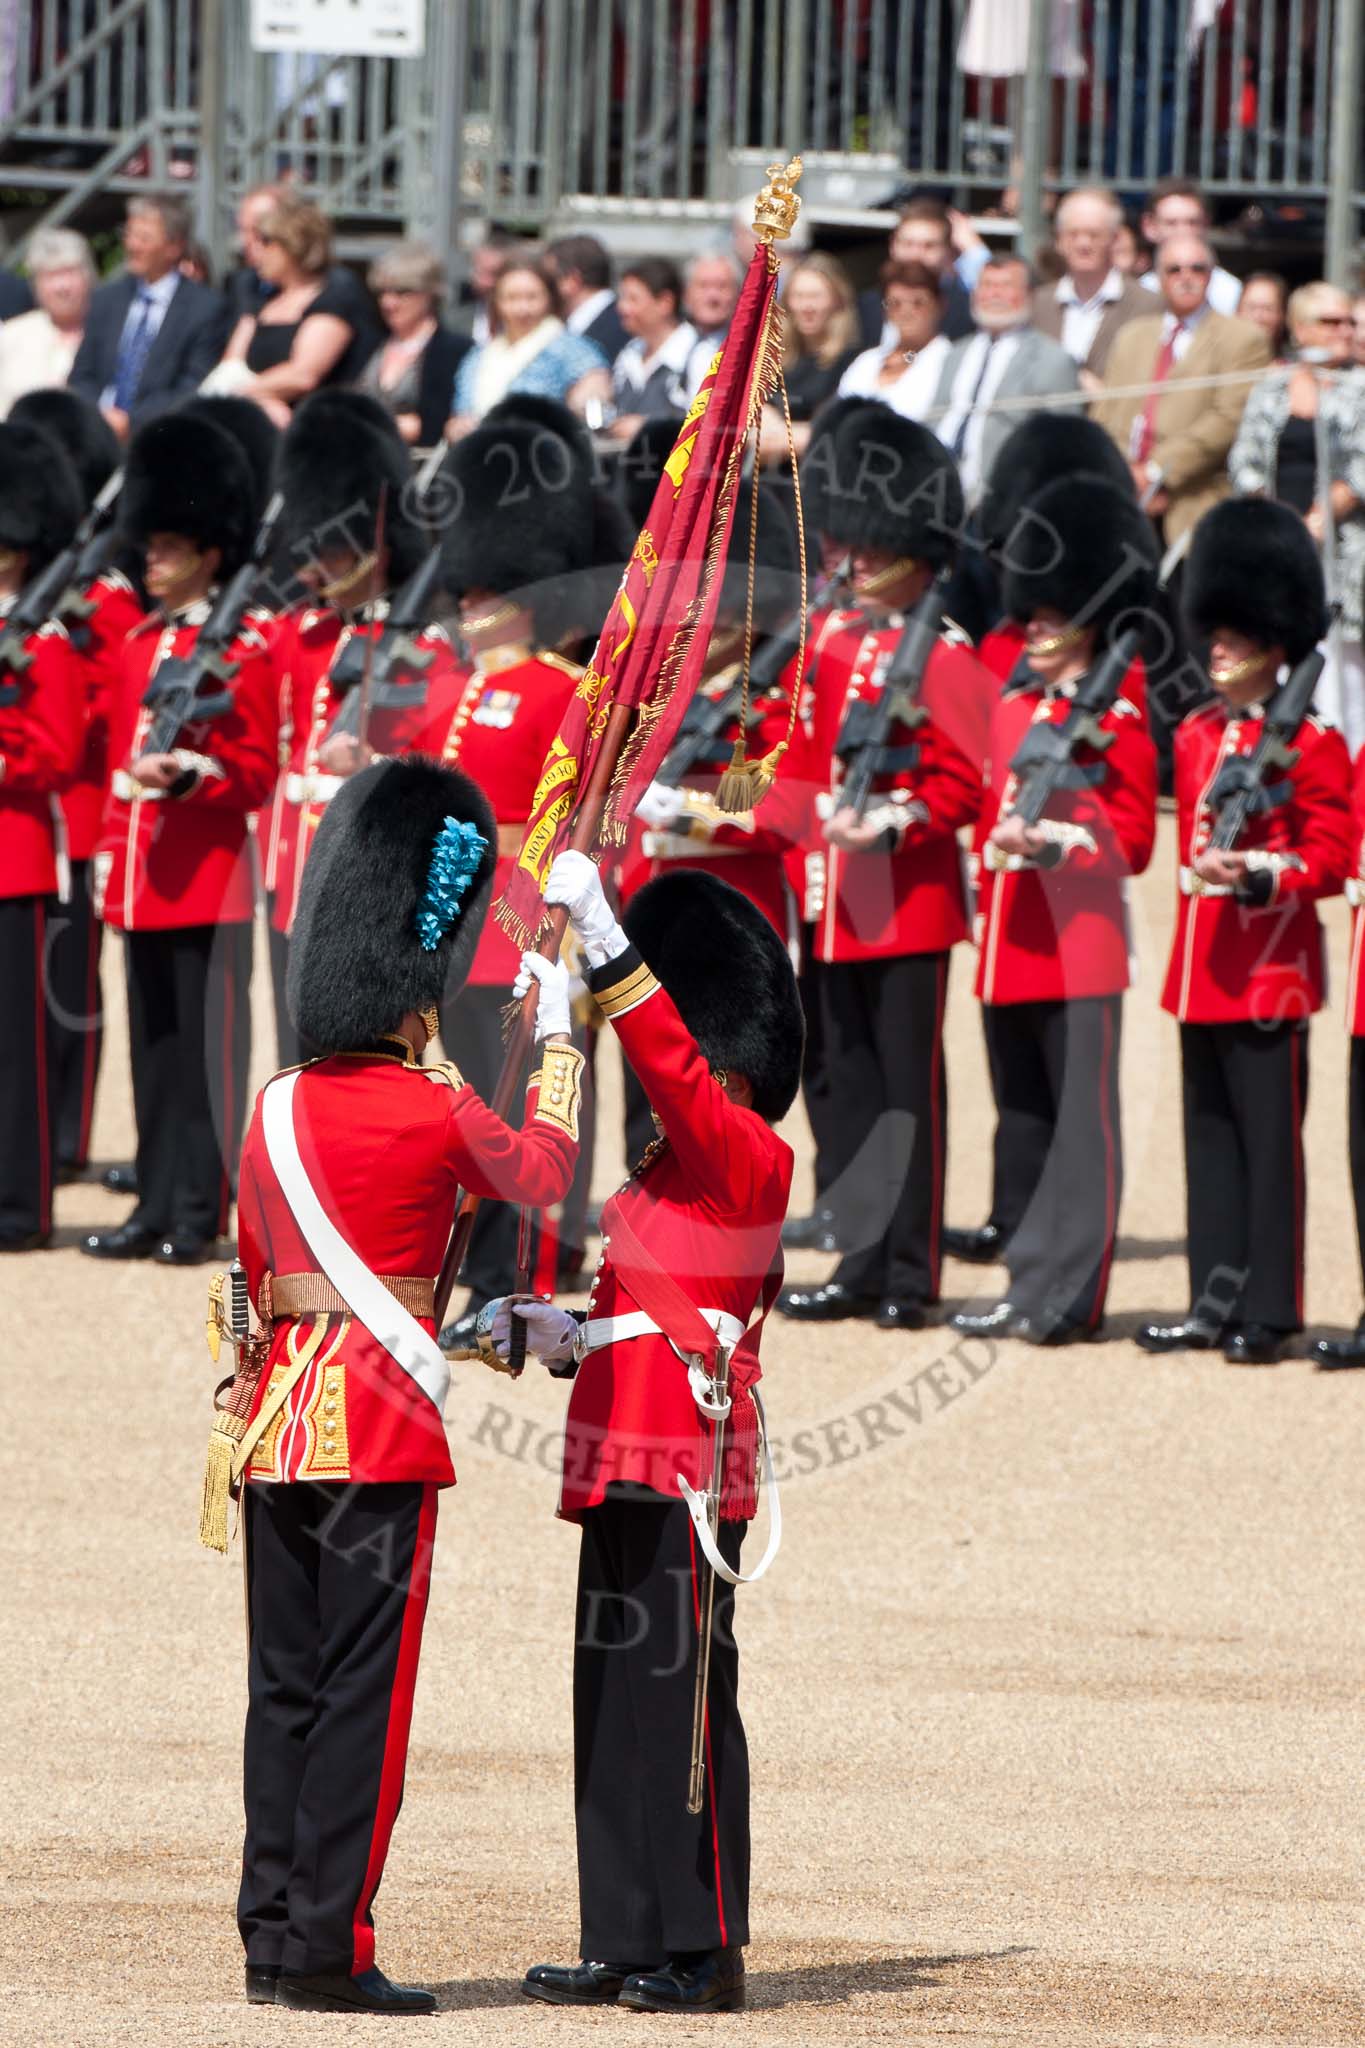 Trooping the Colour 2009: The Regimental Sergeant Major, WO1 Ross Martin, is handing over the Colour to the Ensign, 2nd Lieutenant Andrew Campbell, by placing it into his colour belt..
Horse Guards Parade, Westminster,
London SW1,

United Kingdom,
on 13 June 2009 at 11:21, image #186